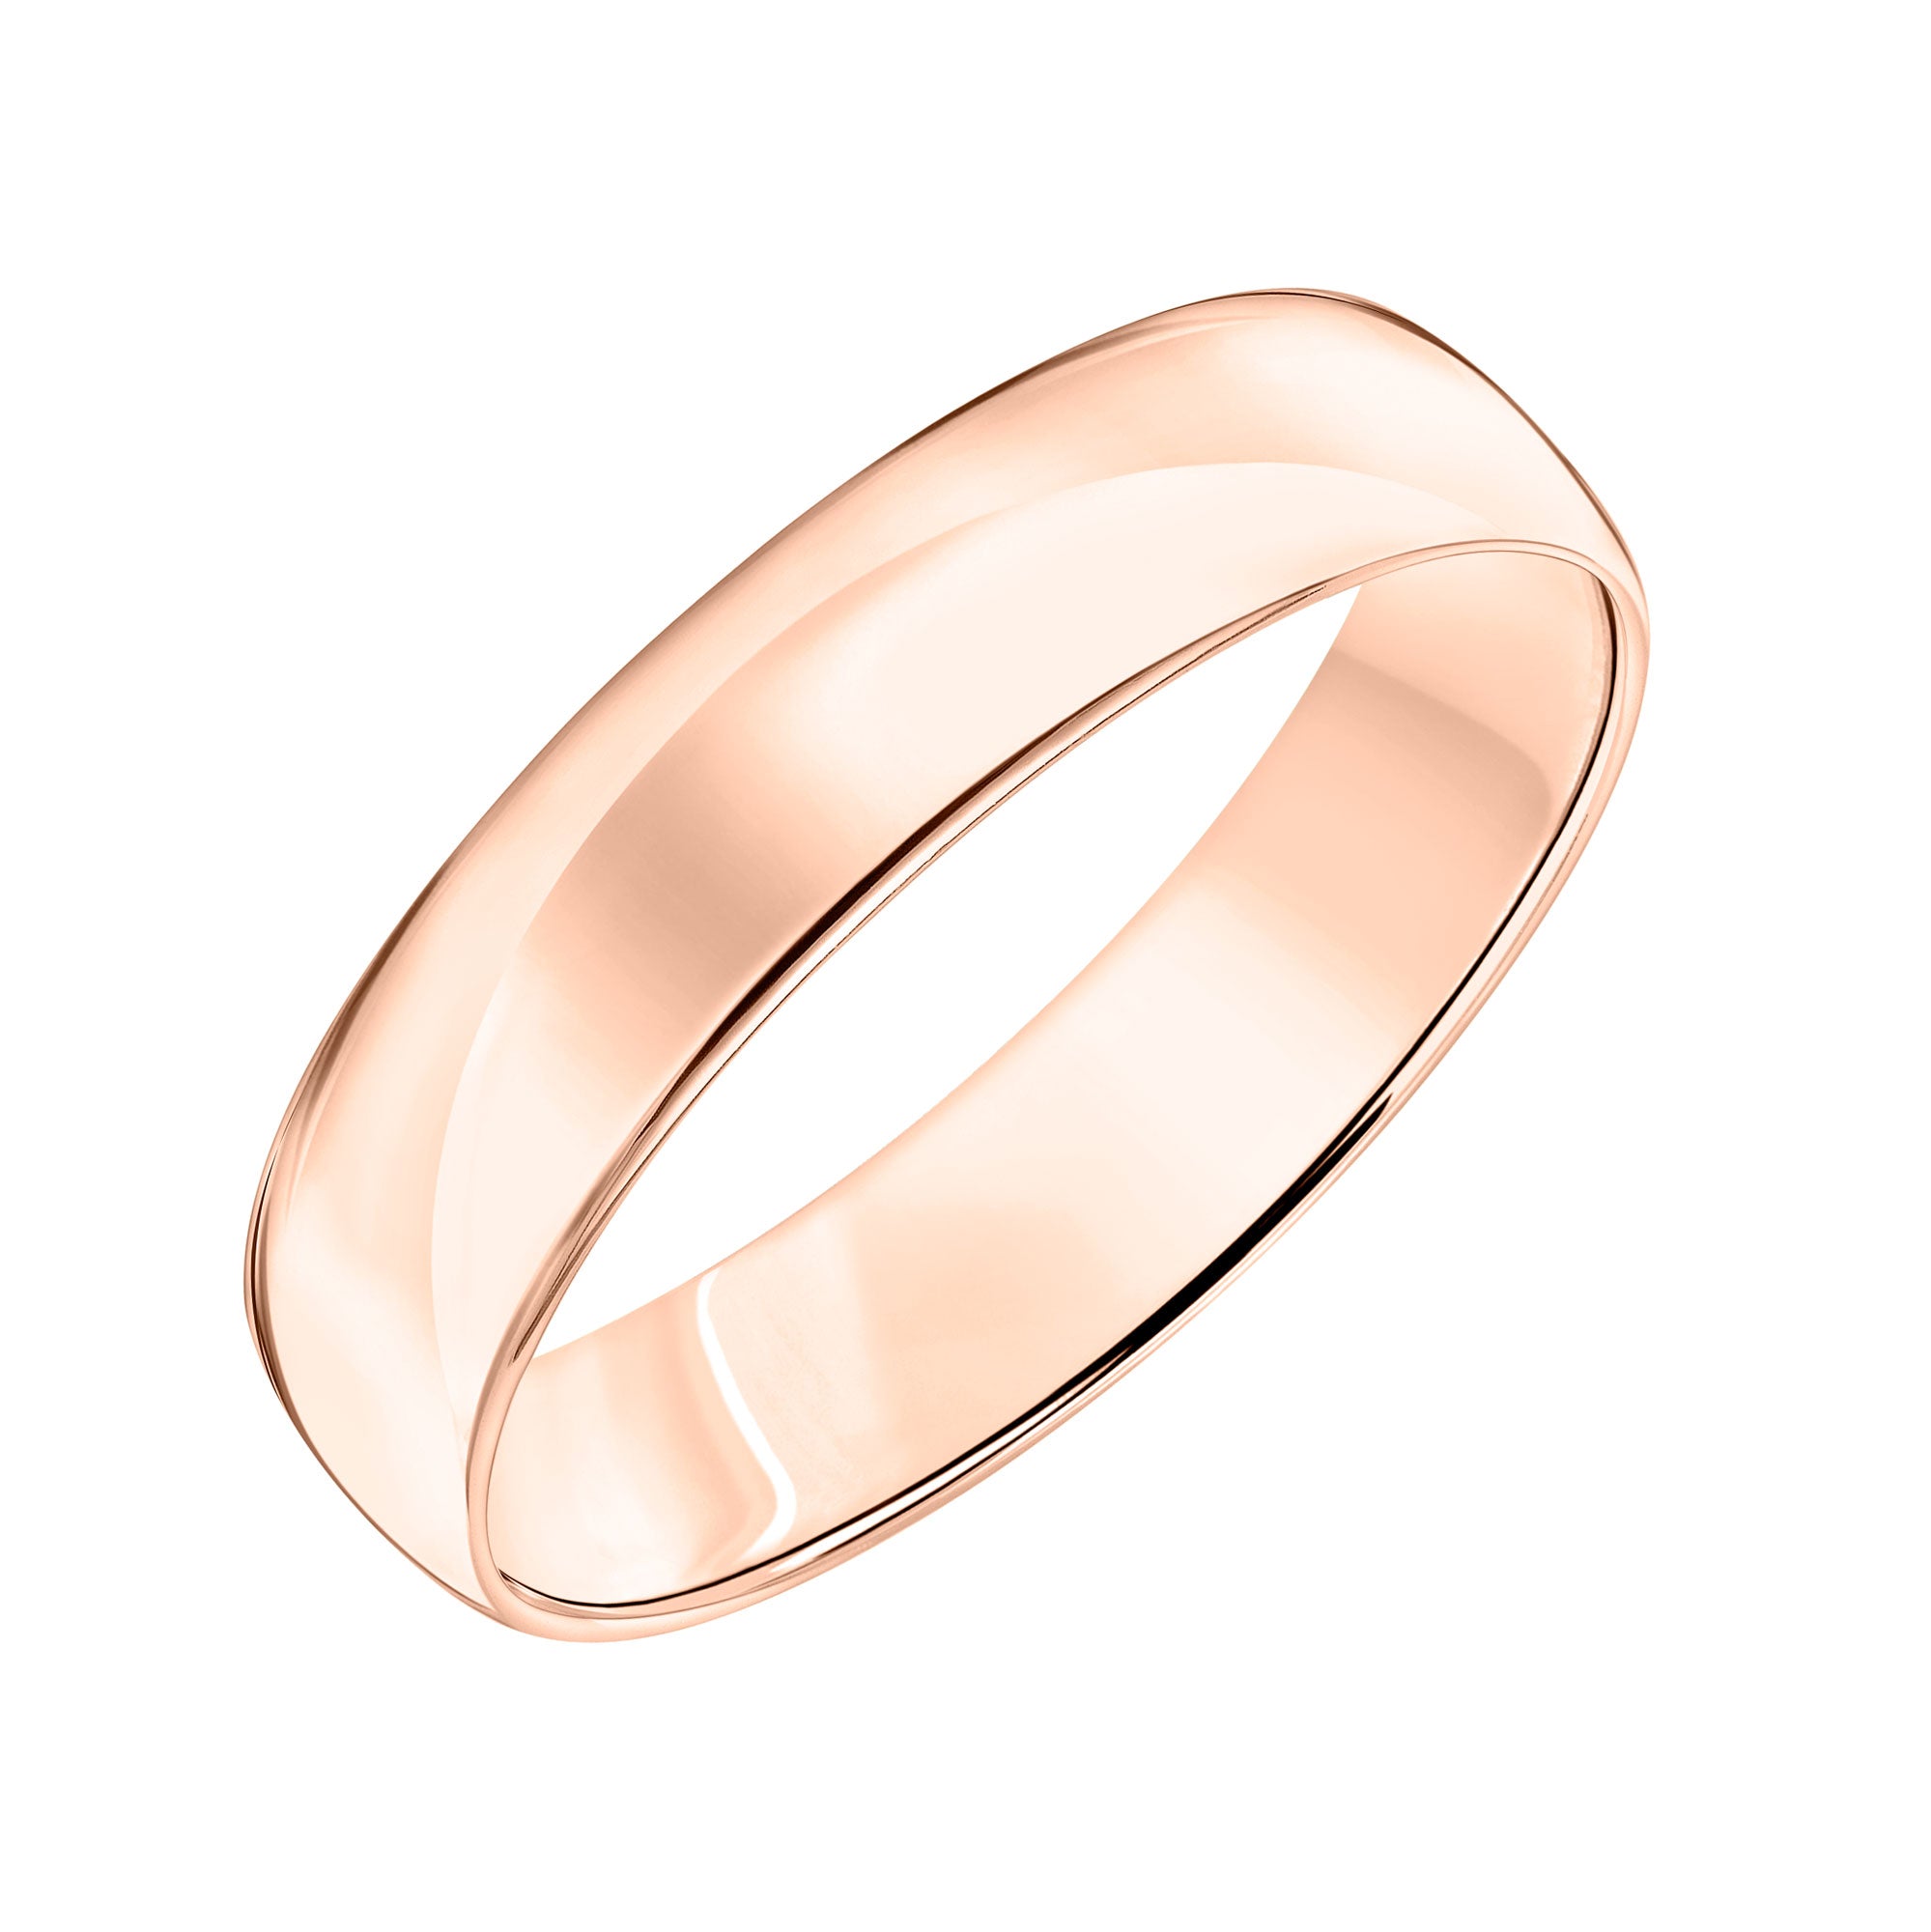 Roux 5mm Light Low Dome Wedding Ring